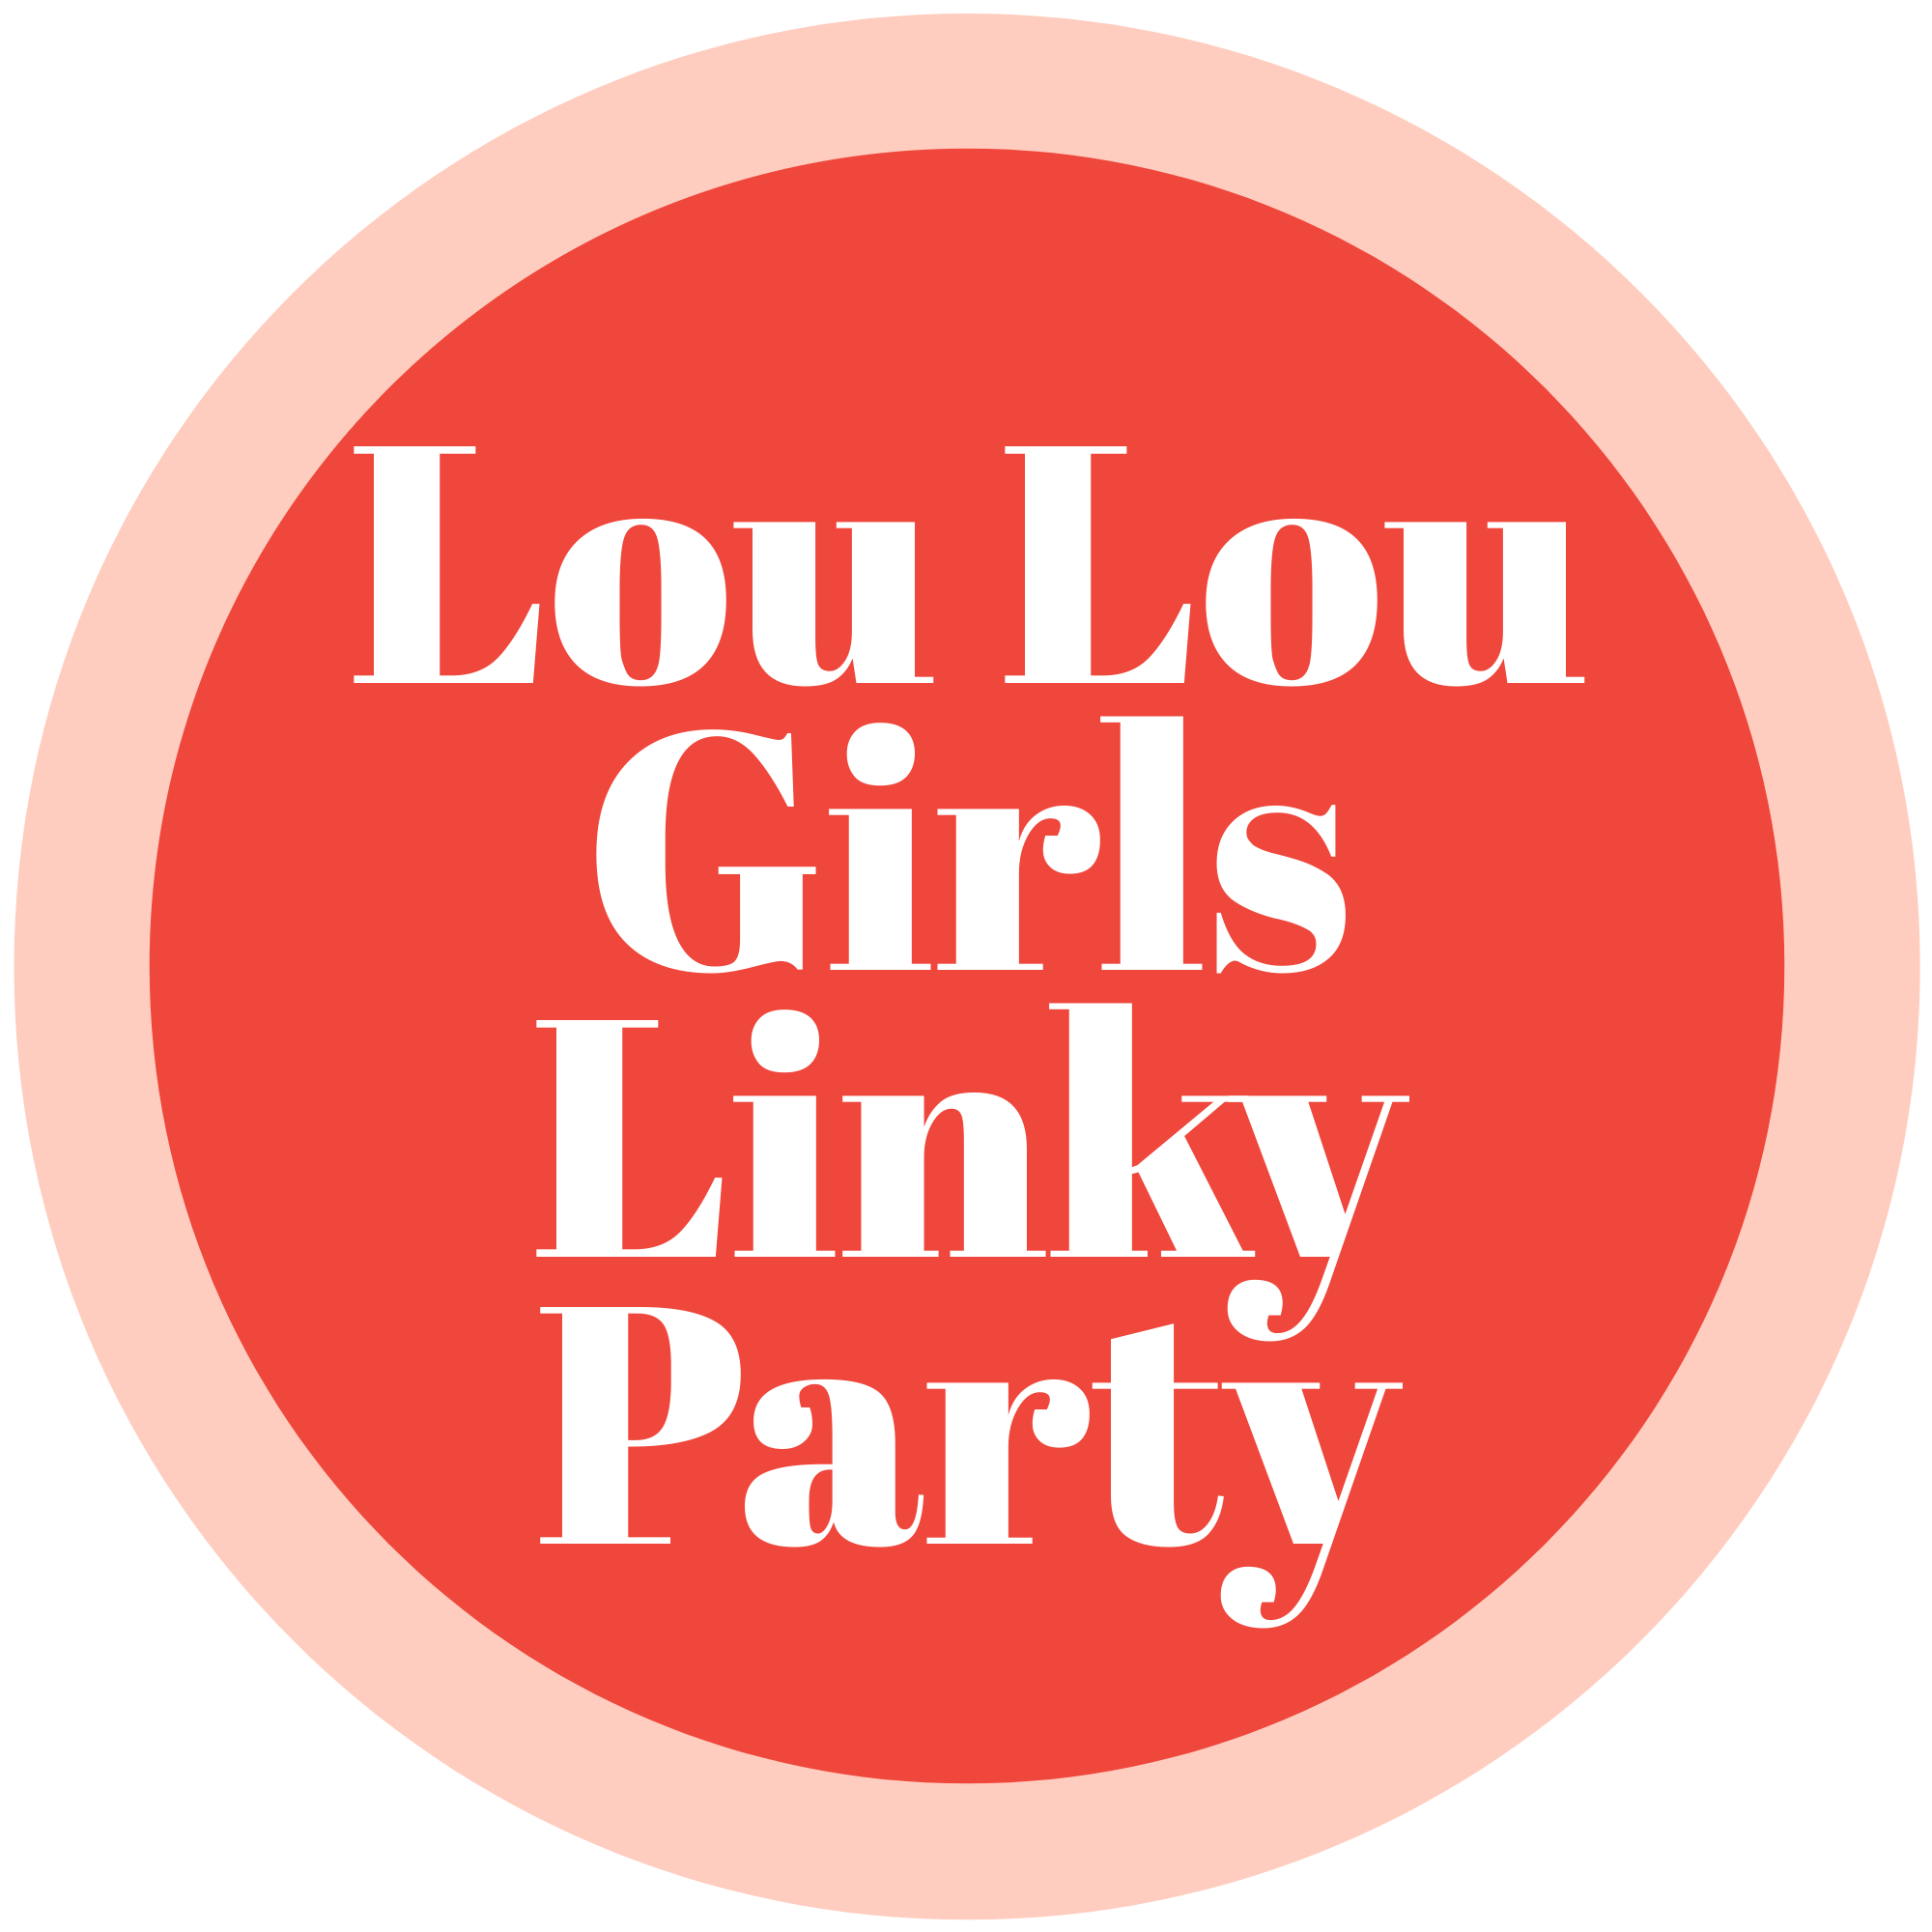 Lou Lou Girls Fabulous Party 485 #linkyparty #bloghop #linkyparties